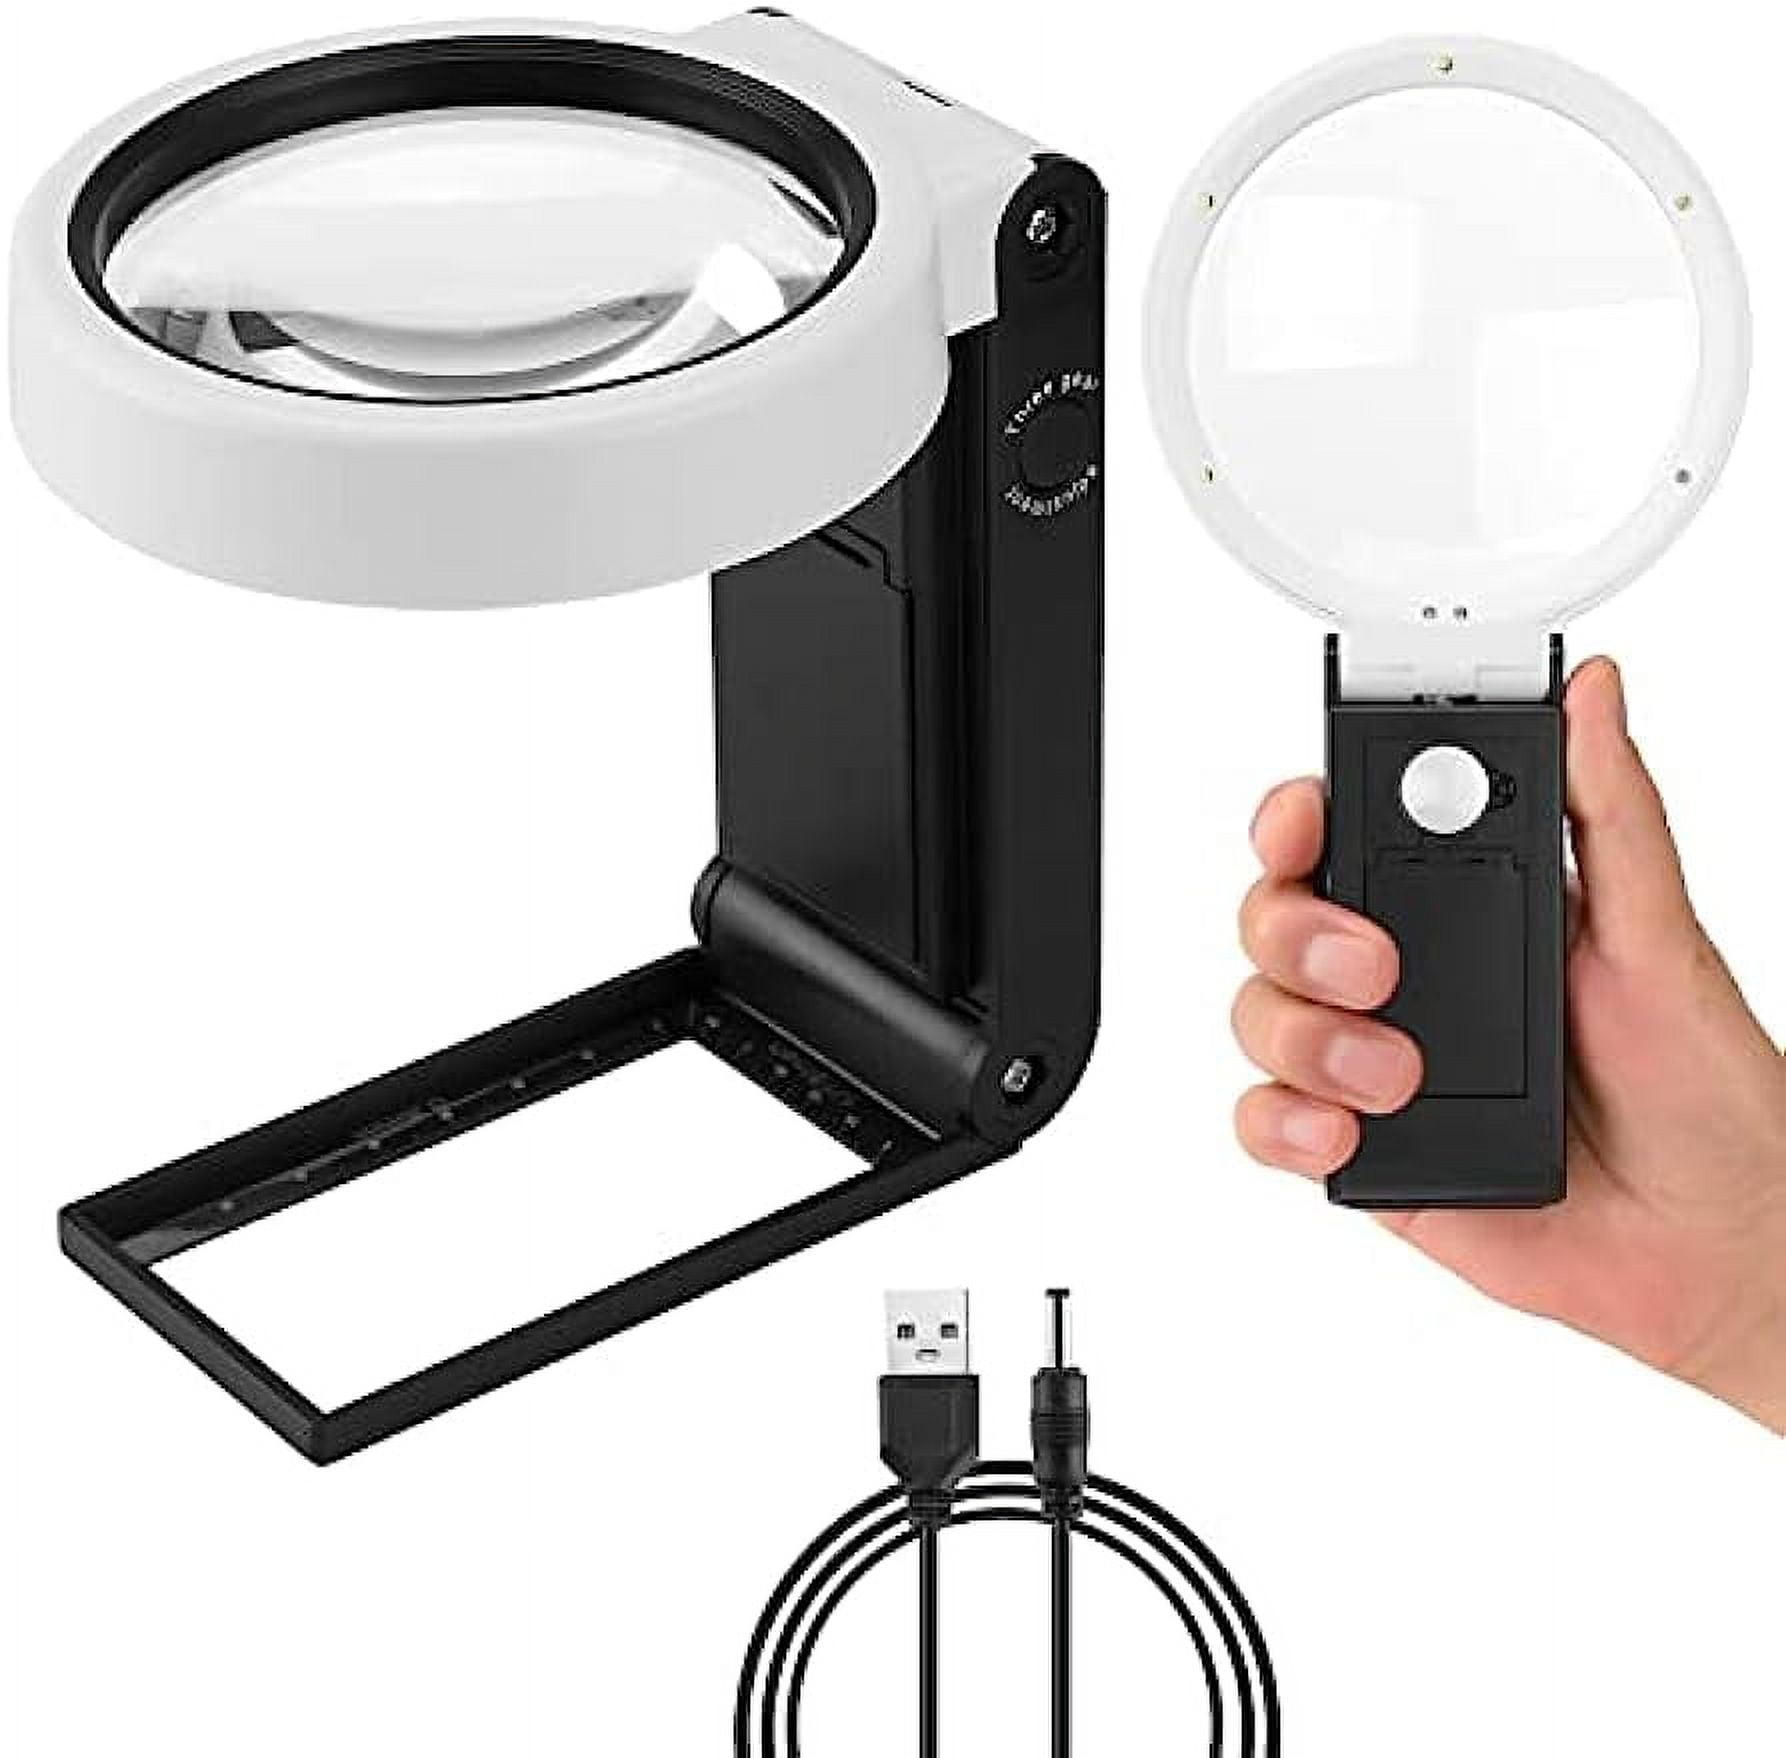 New Desktop Magnifying Glass with 21 LED lights 10X table